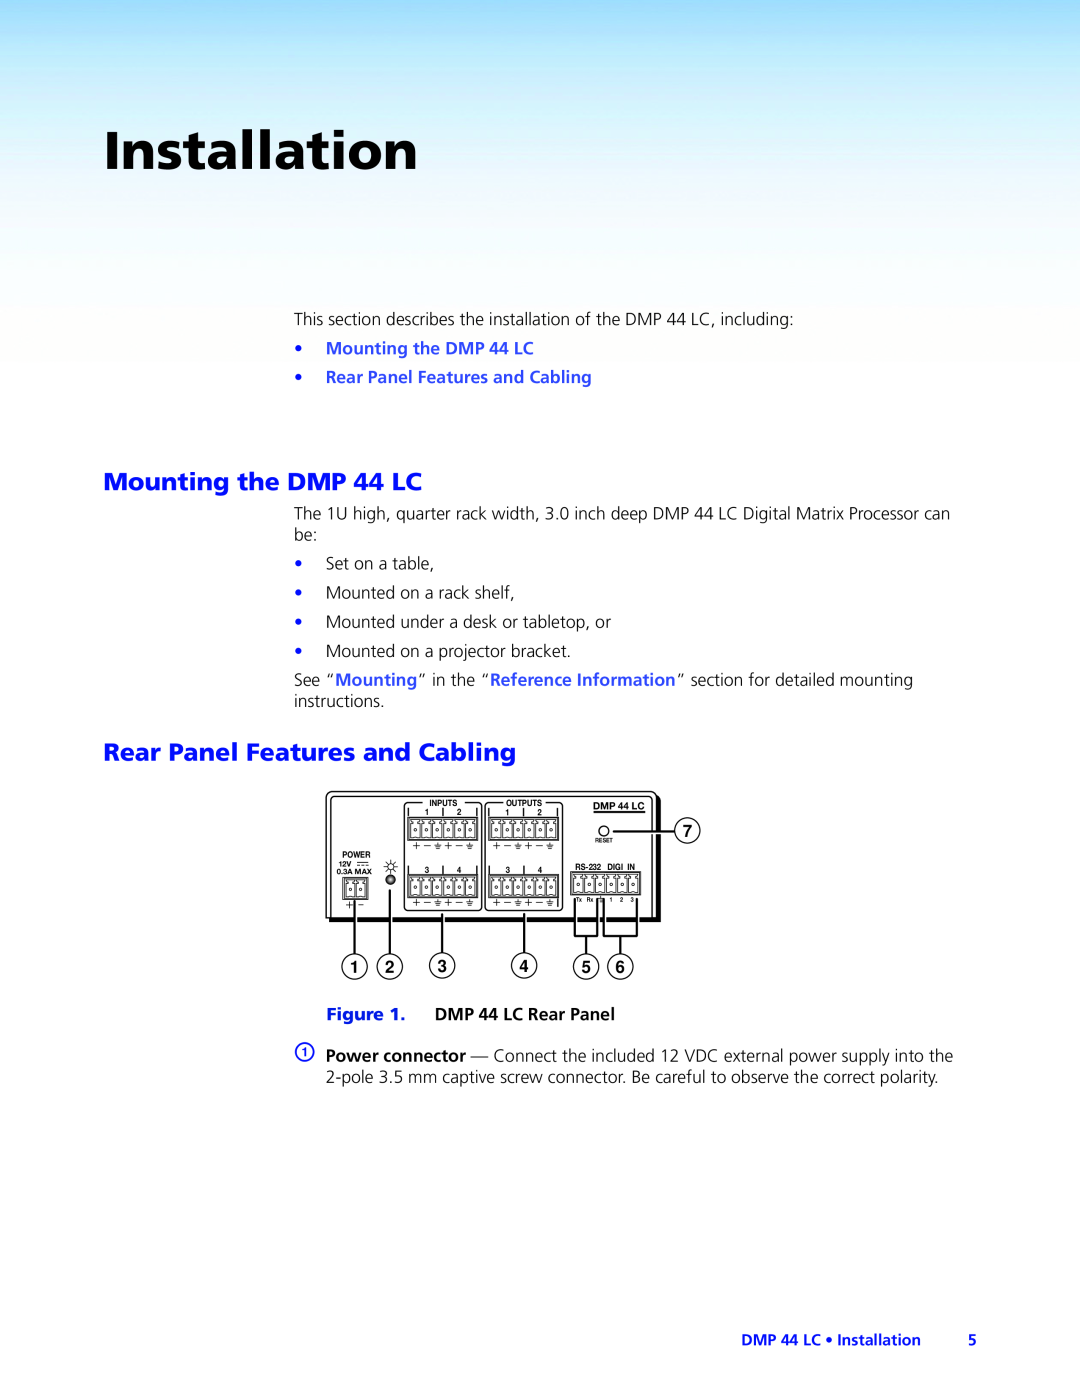 Extron electronic Installation, Rear Panel Features and Cabling, •Mounting the DMP 44 LC, DMP 44 LC Rear Panel 